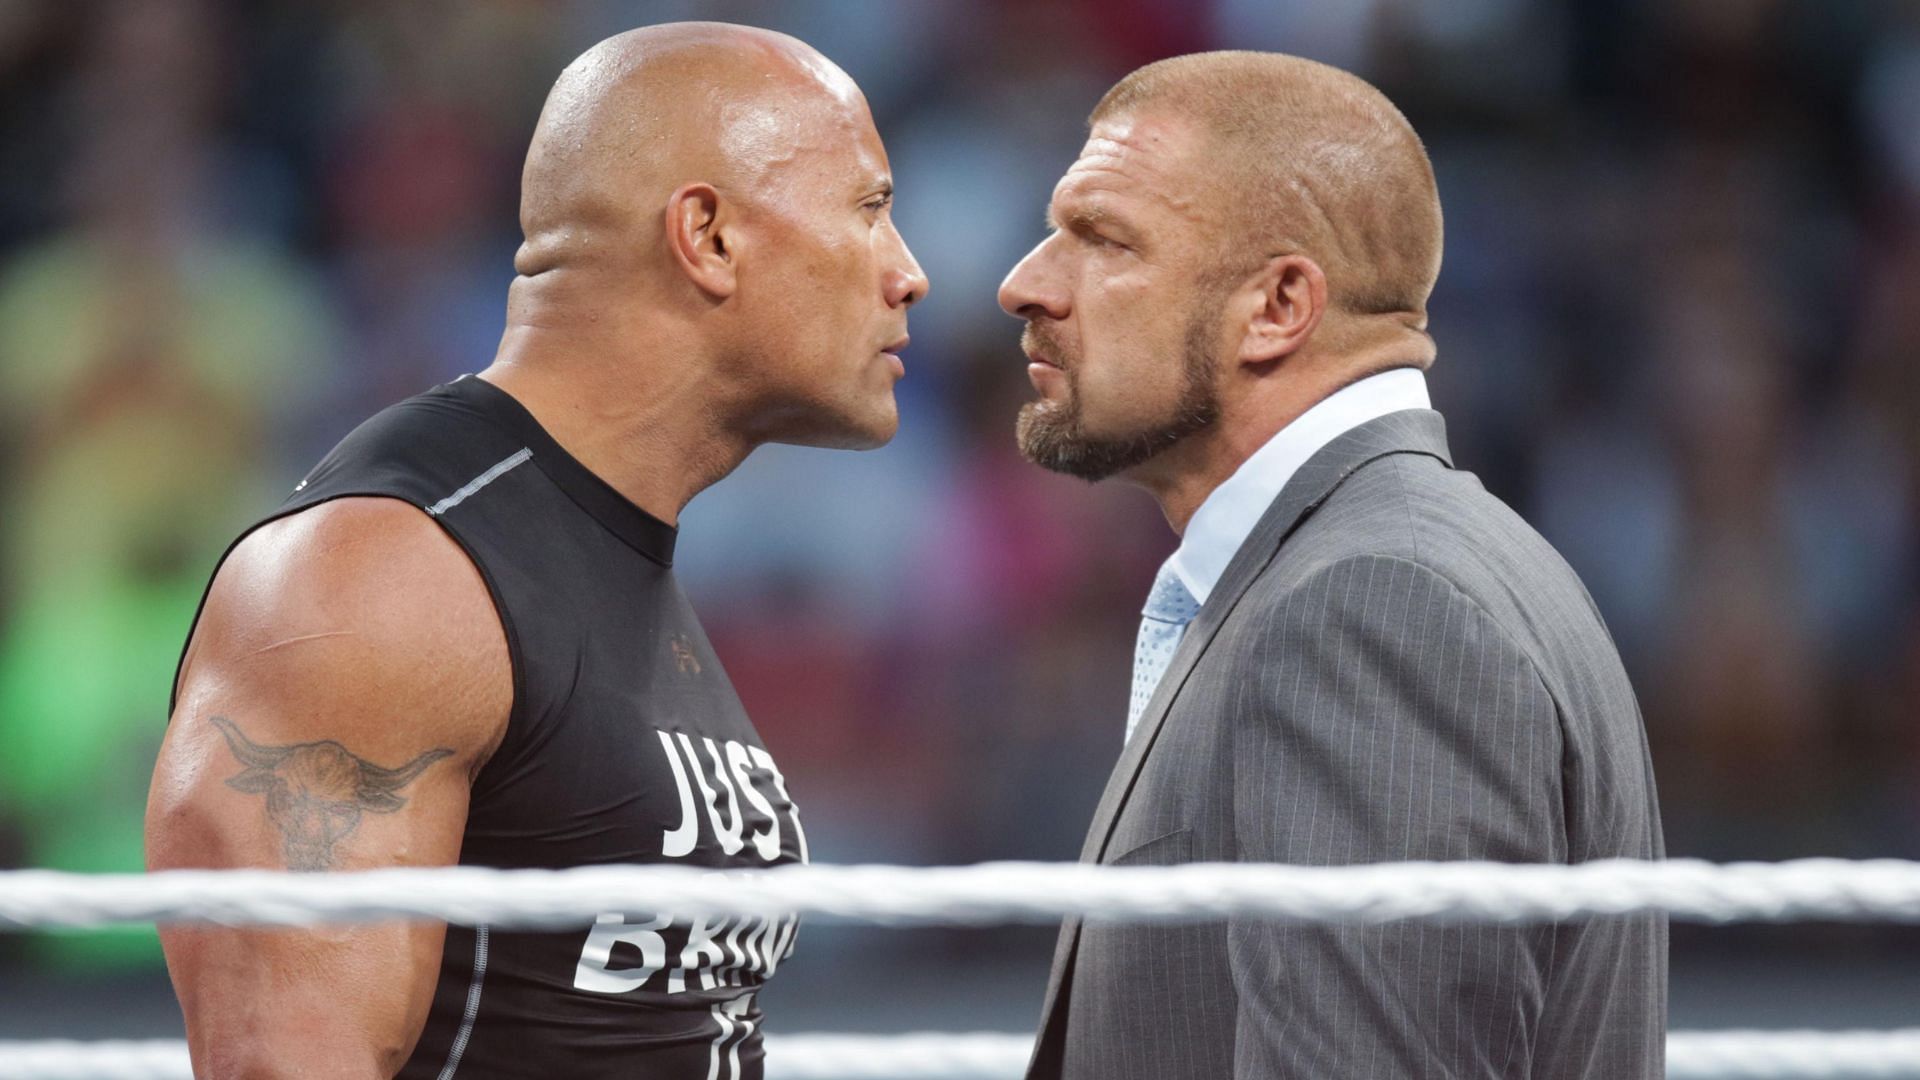 The Rock vs. Triple H was planned for WrestleMania 31, and even teased on SmackDown in Oct. 10, 2014